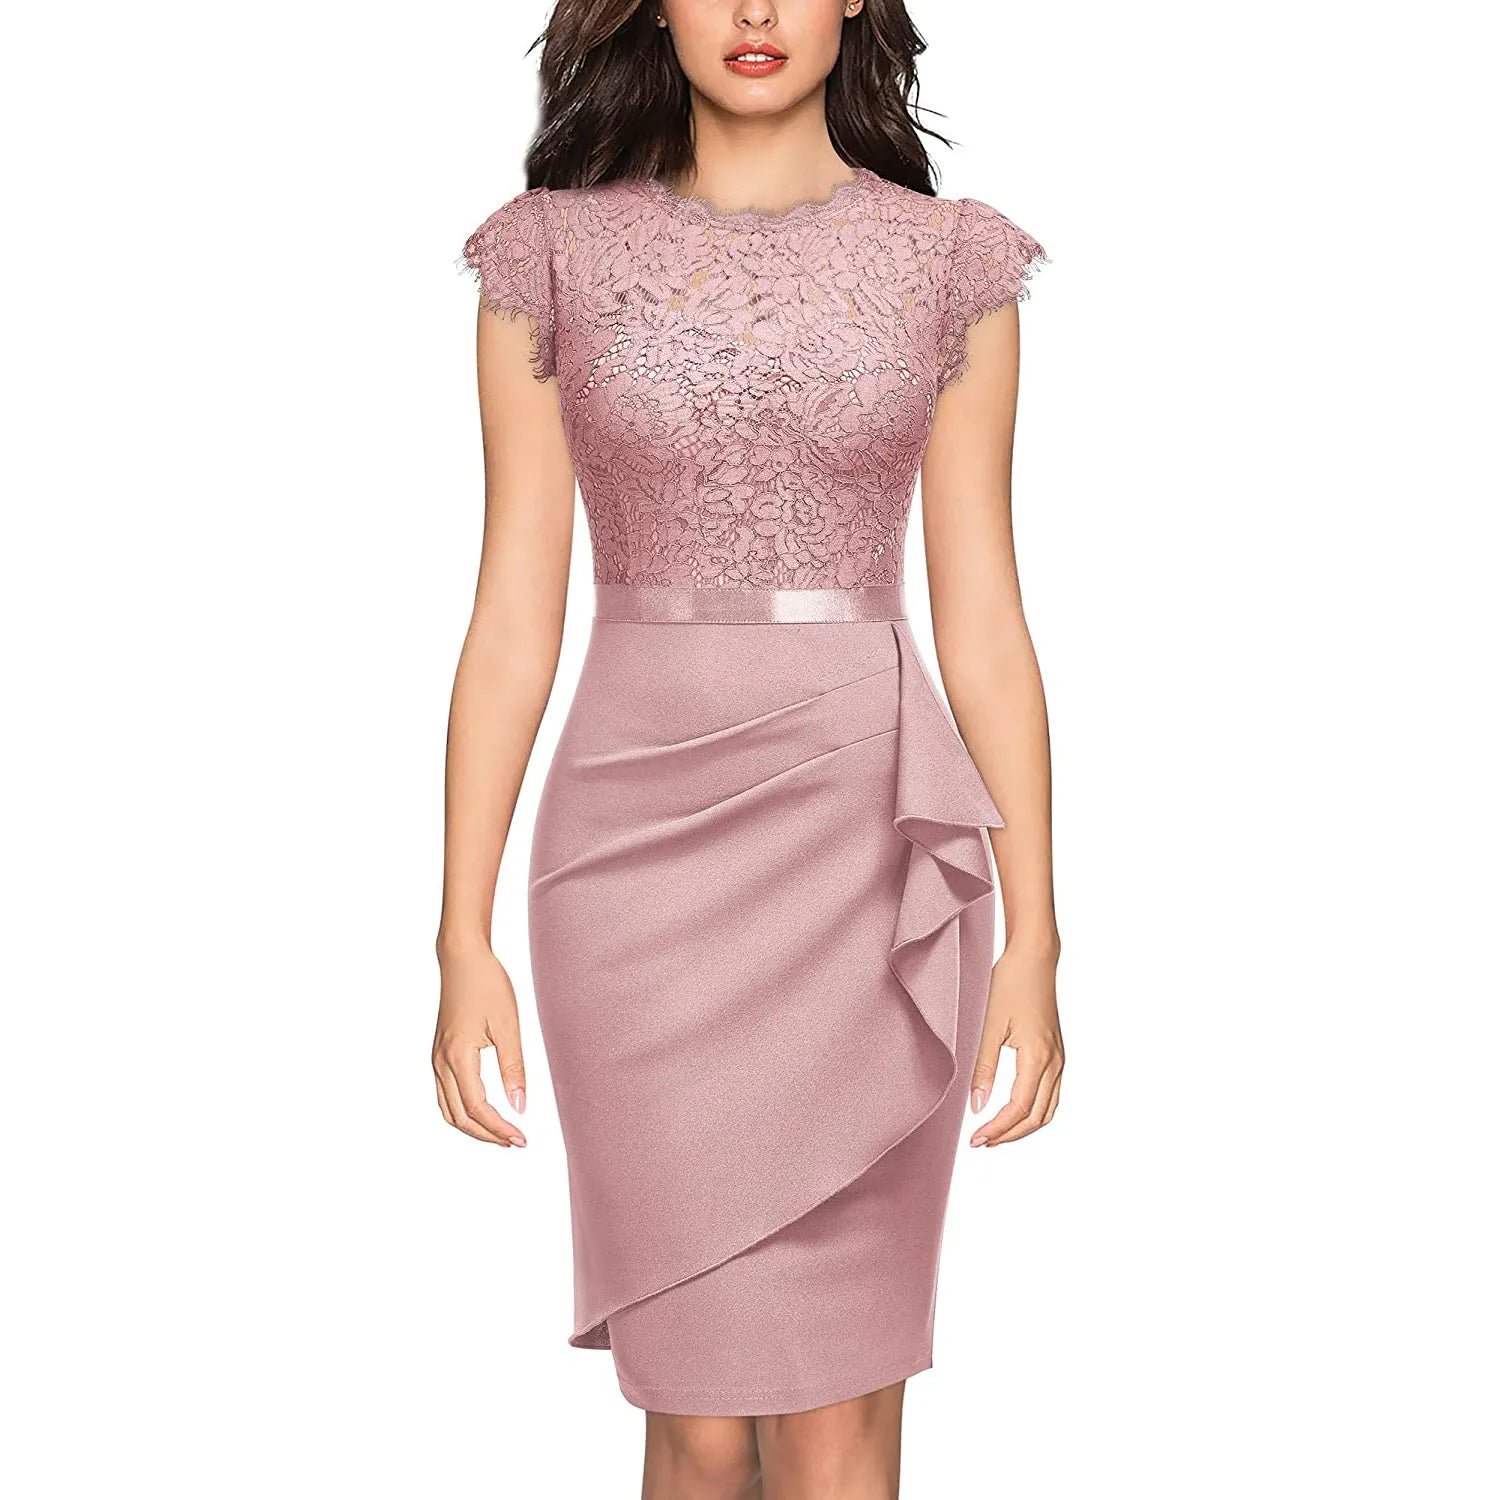 Elegant Floral Lace Ruffle Cap Sleeve Cocktail Party Knee Length Dress